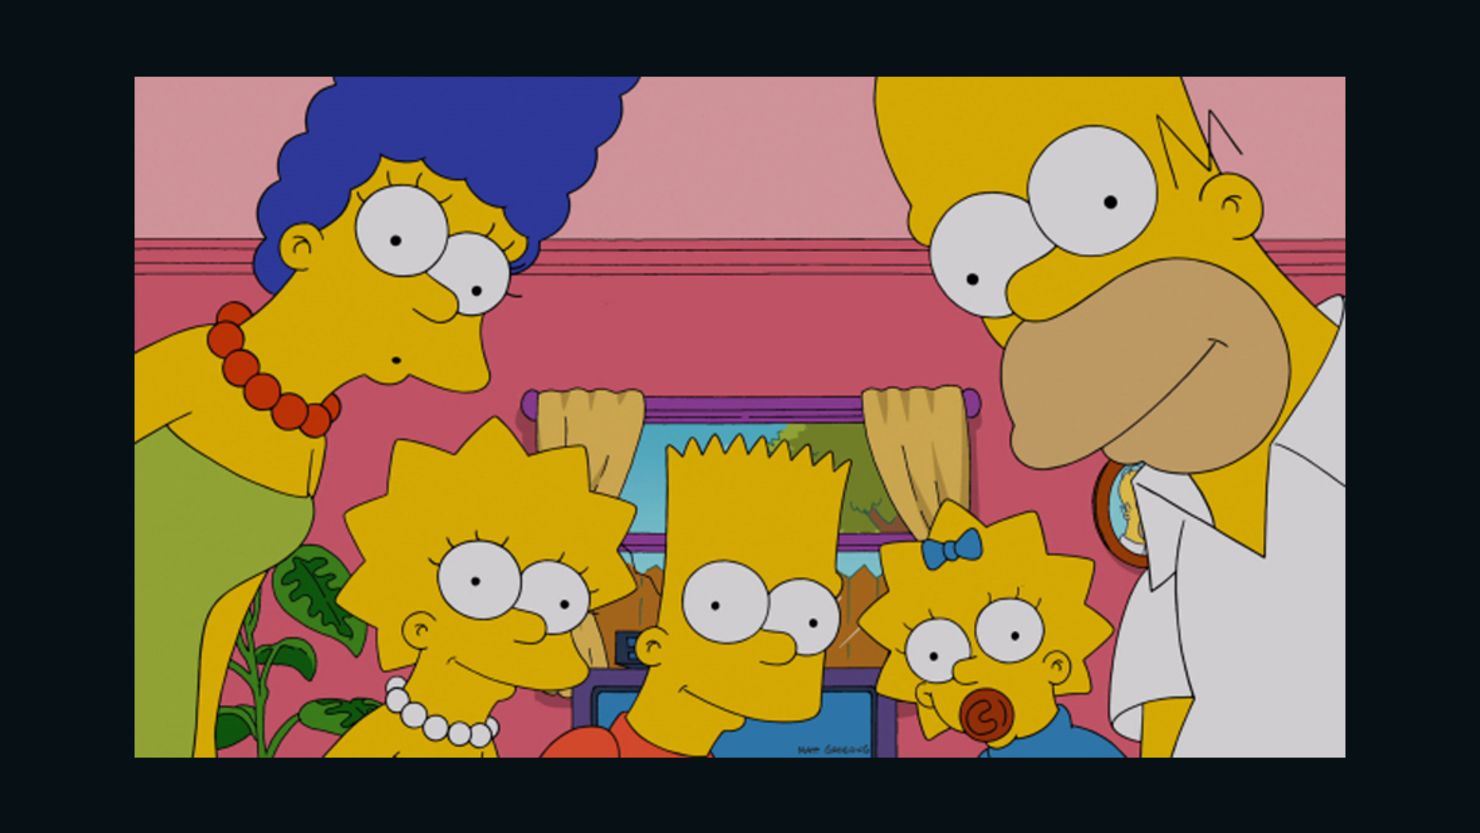 "The Simpsons" has been on the air since 1989.